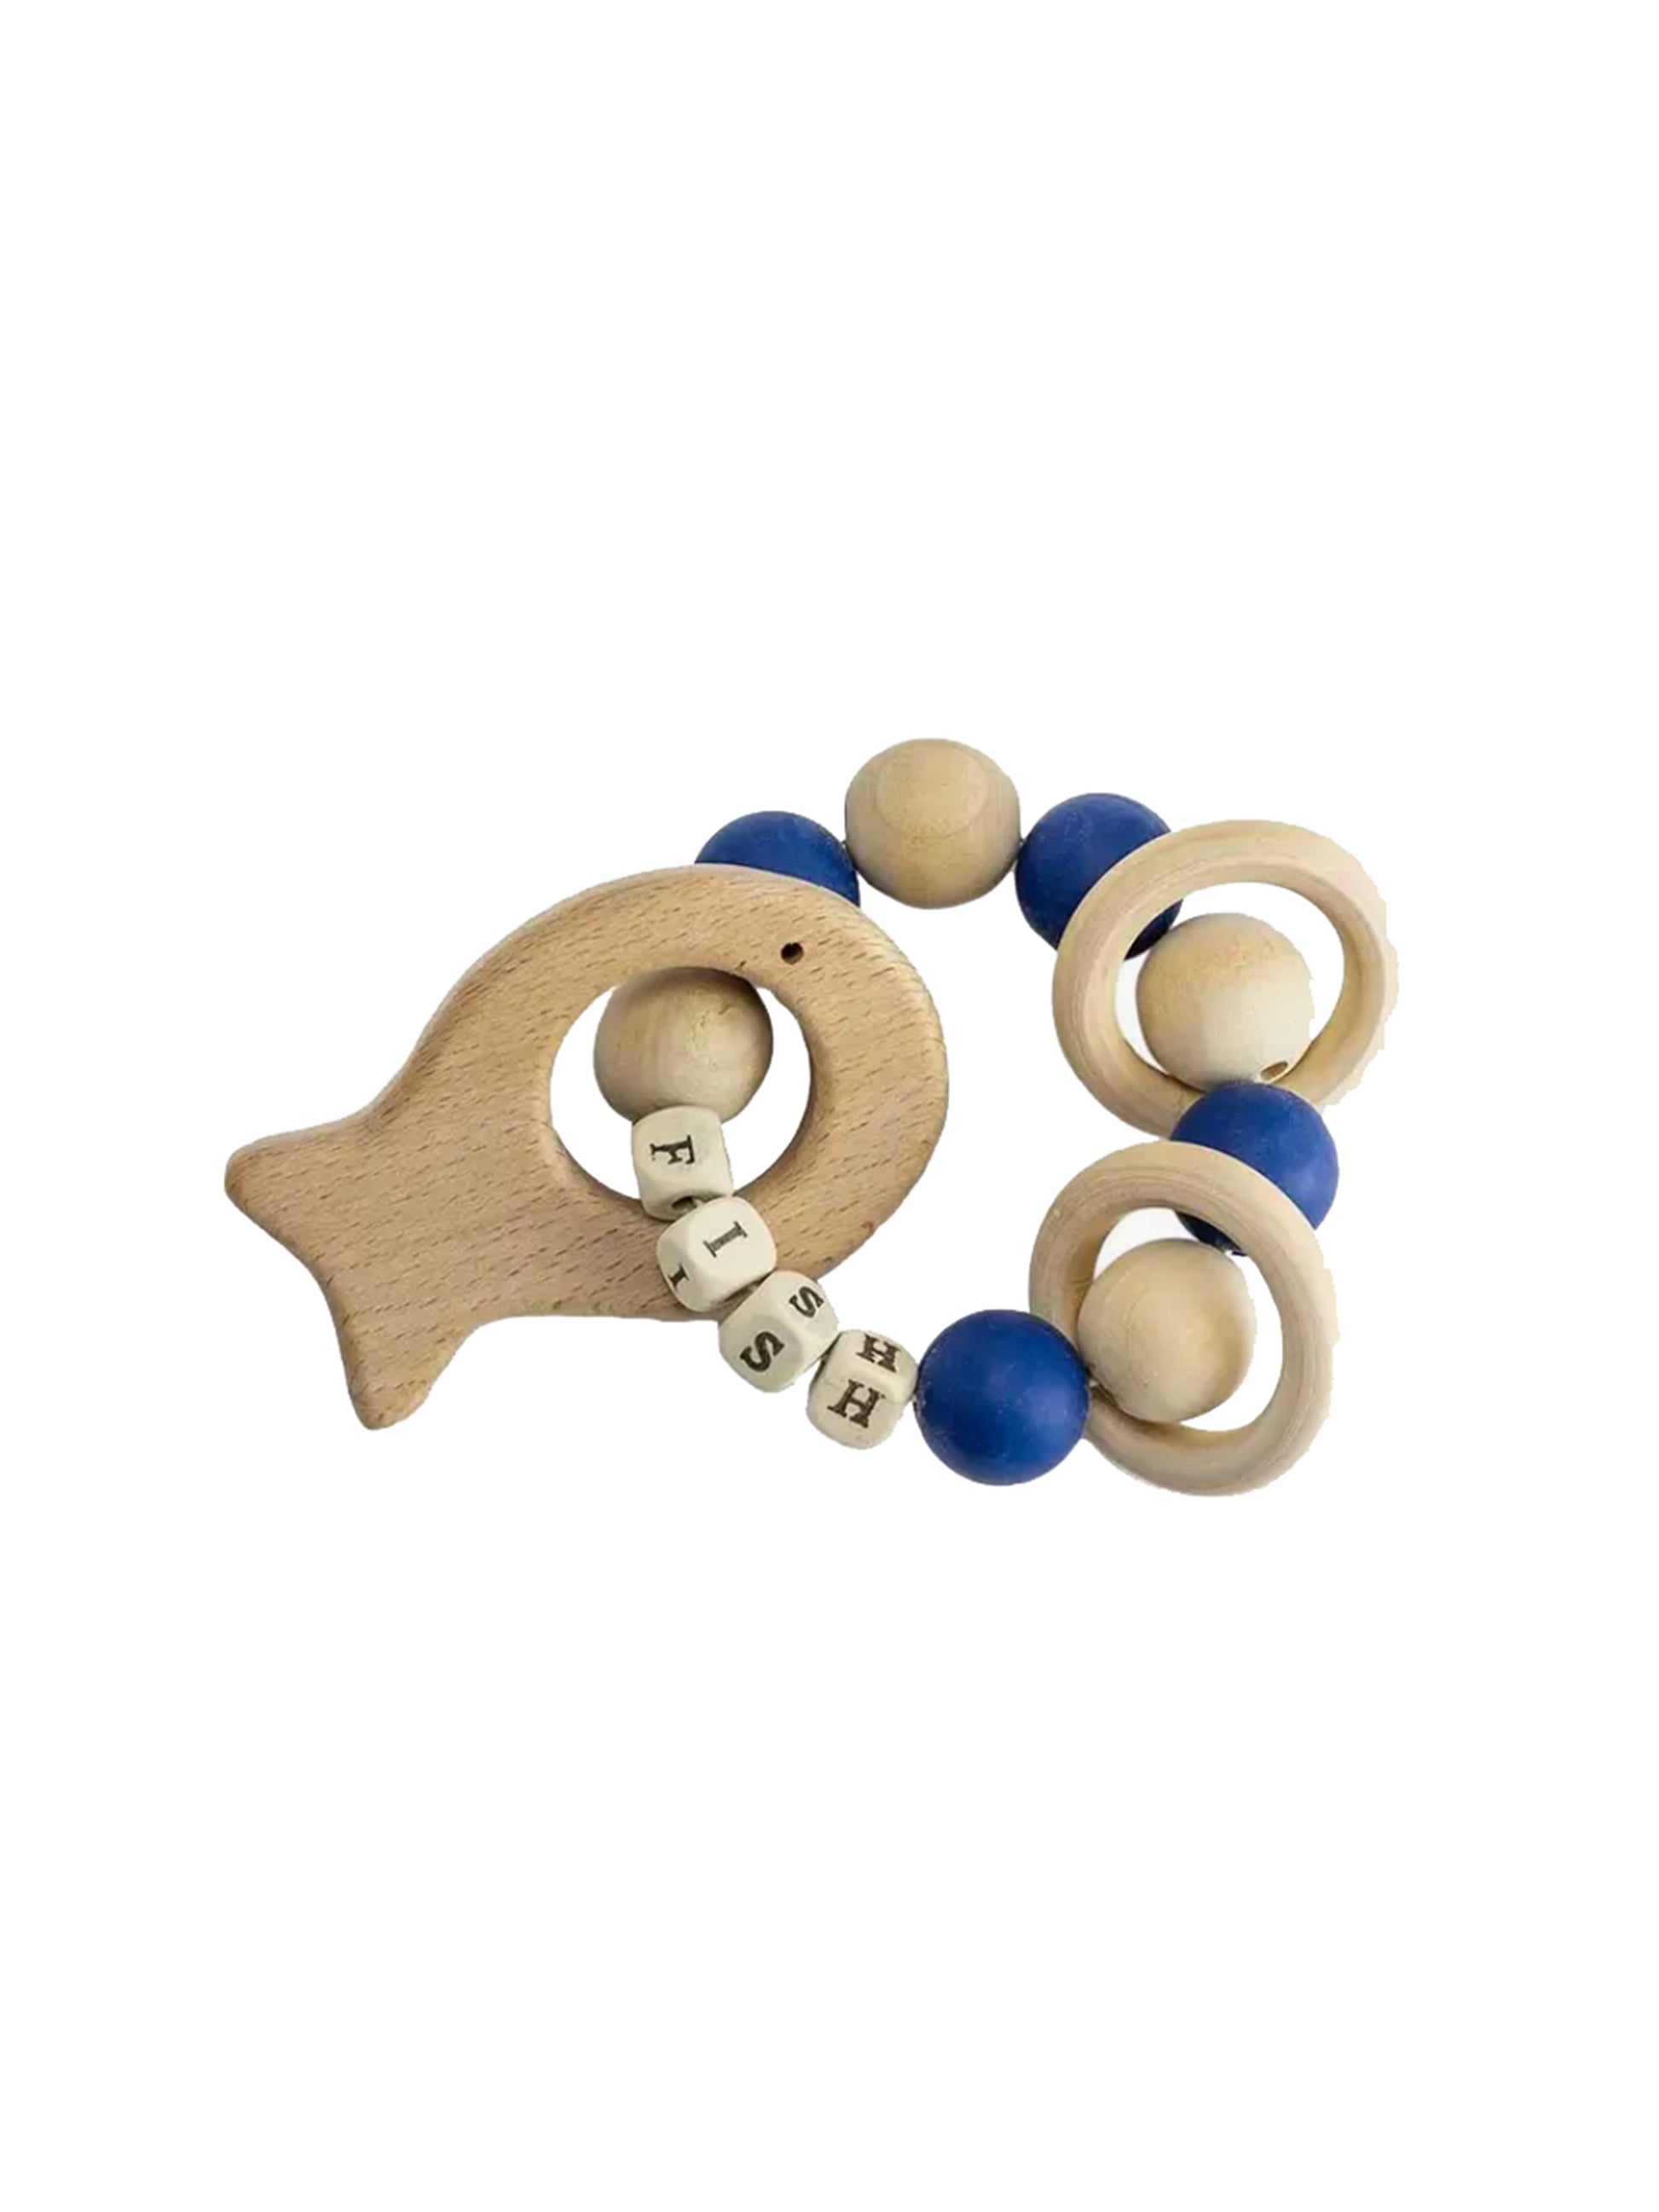 Shop the Wooden Fish Teether at Weston Table